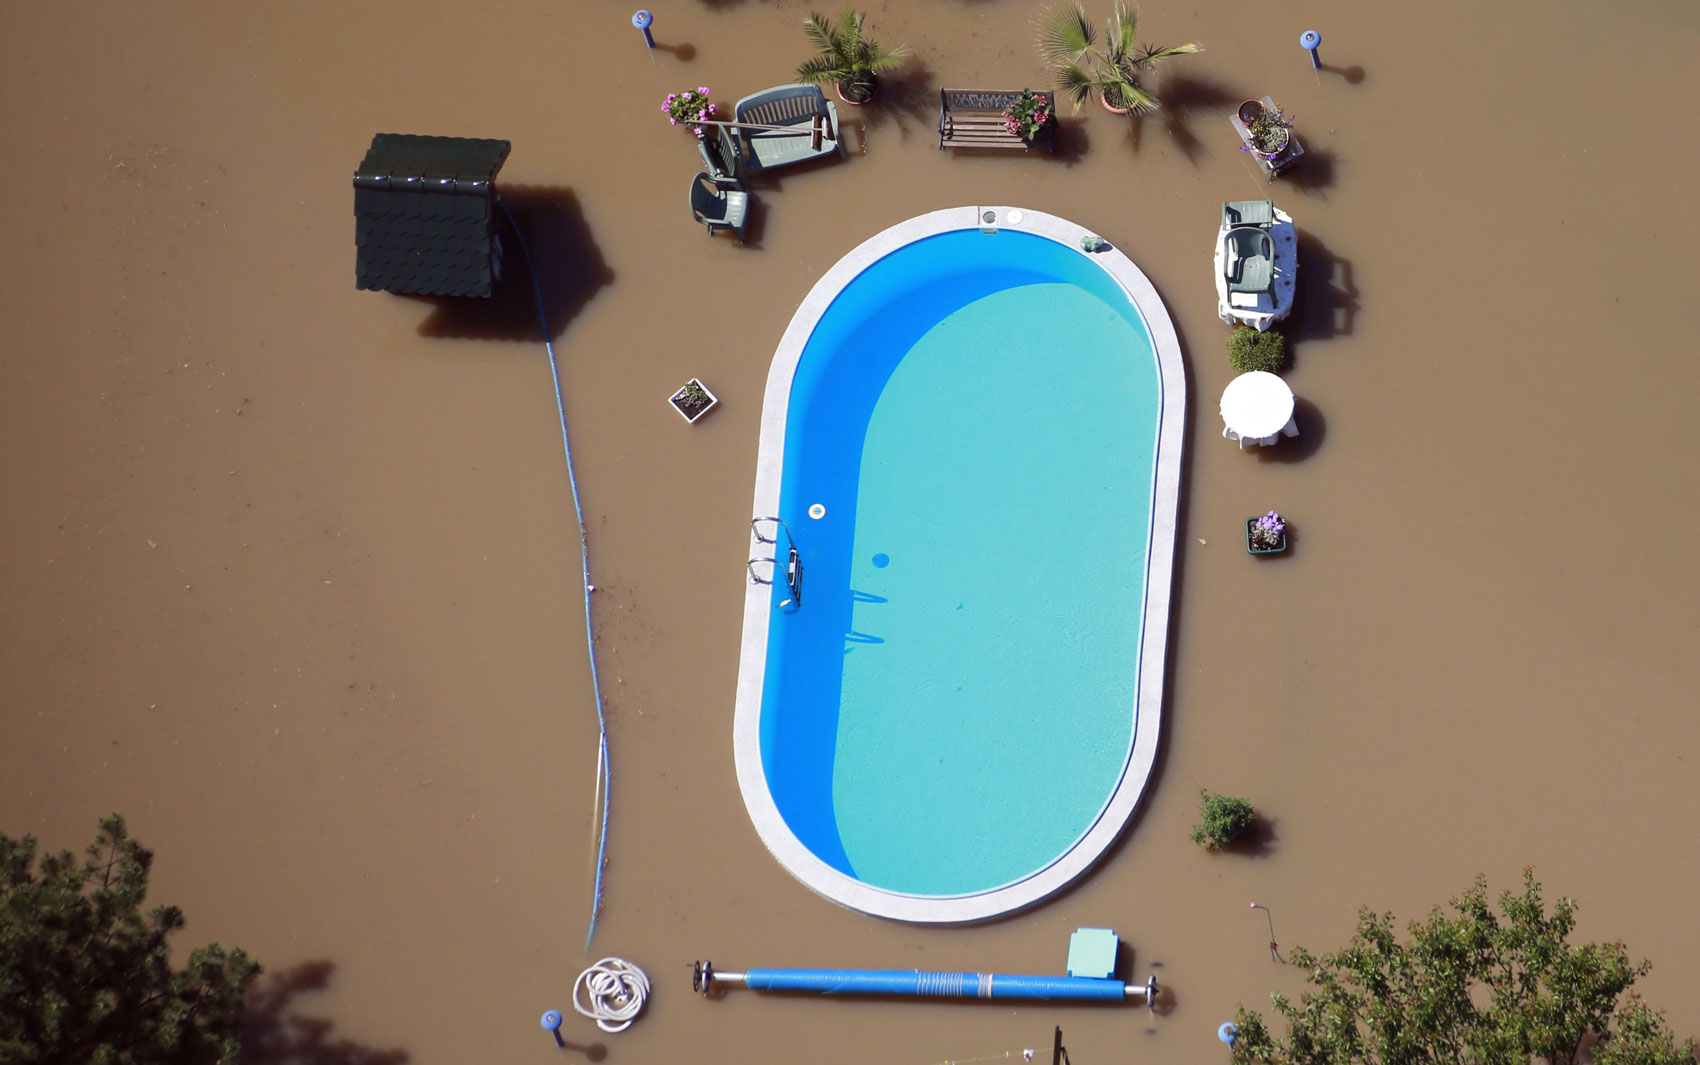 A pool during a flood that just narrowly avoids being contaminated.